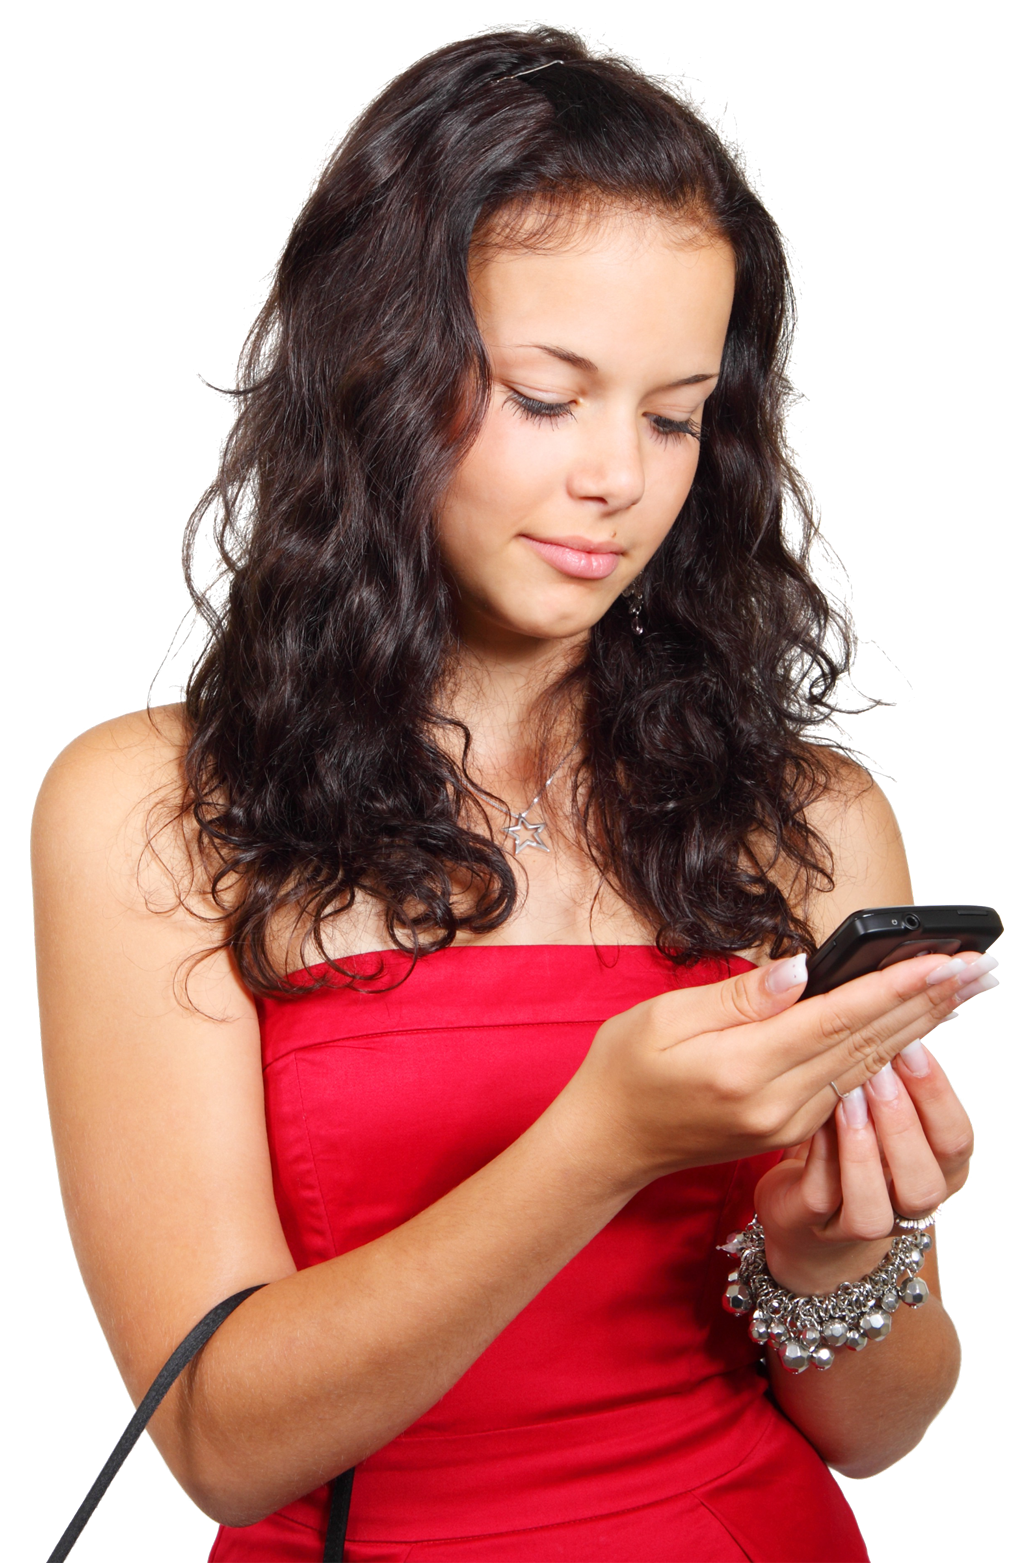 Mobile Hand Phone Holding Using Girl PNG Image